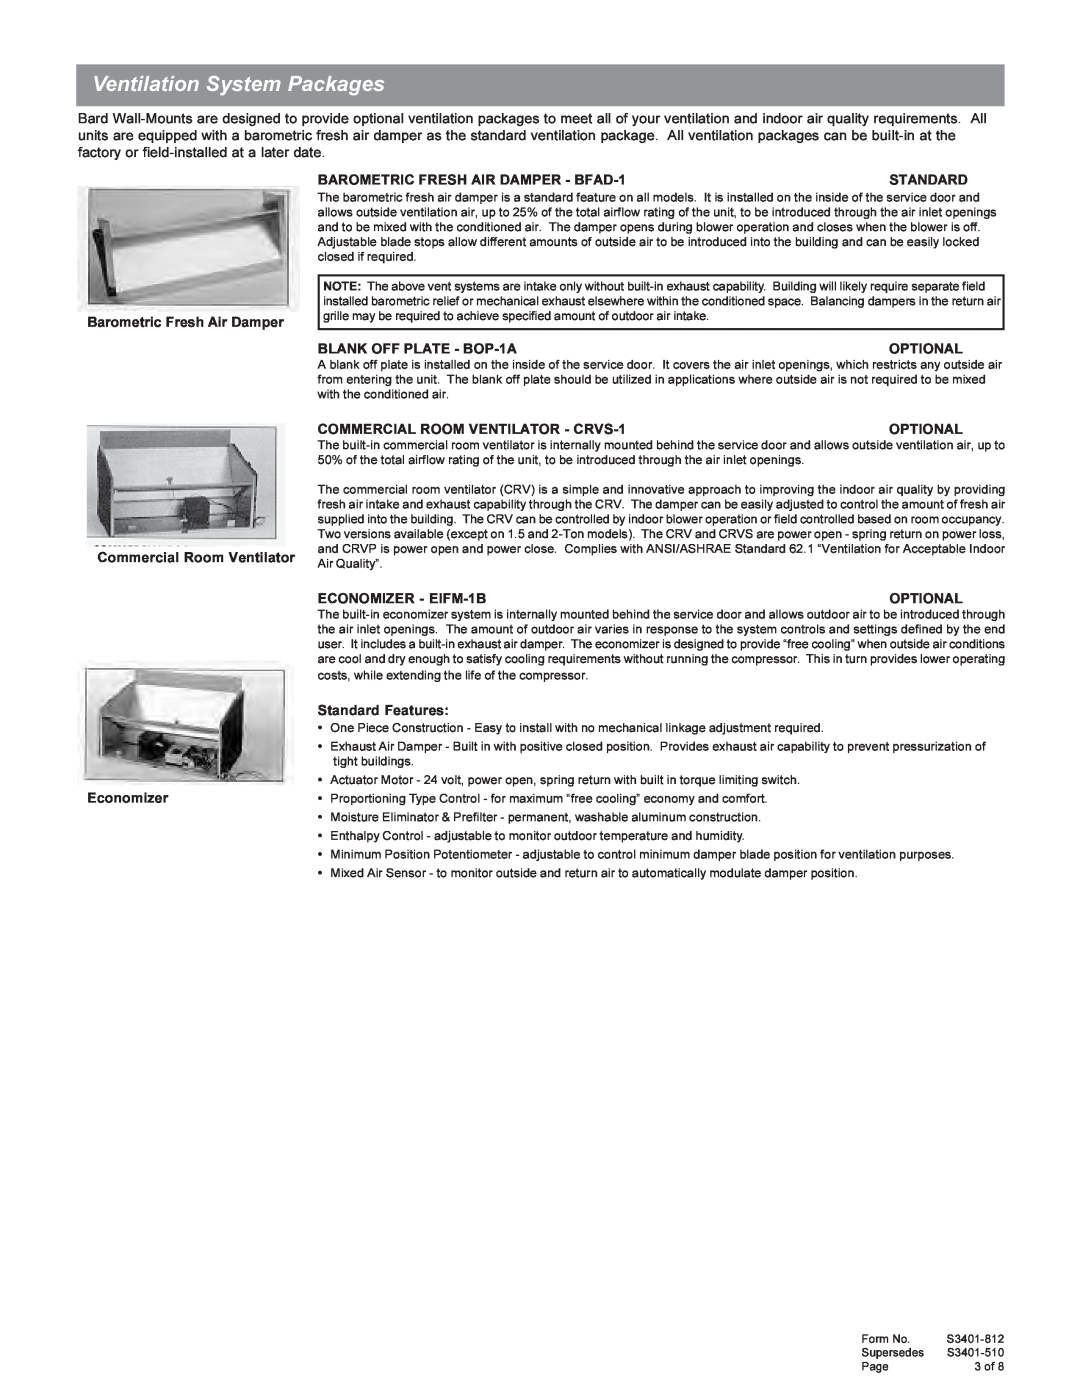 Bard W12A manual Ventilation System Packages 